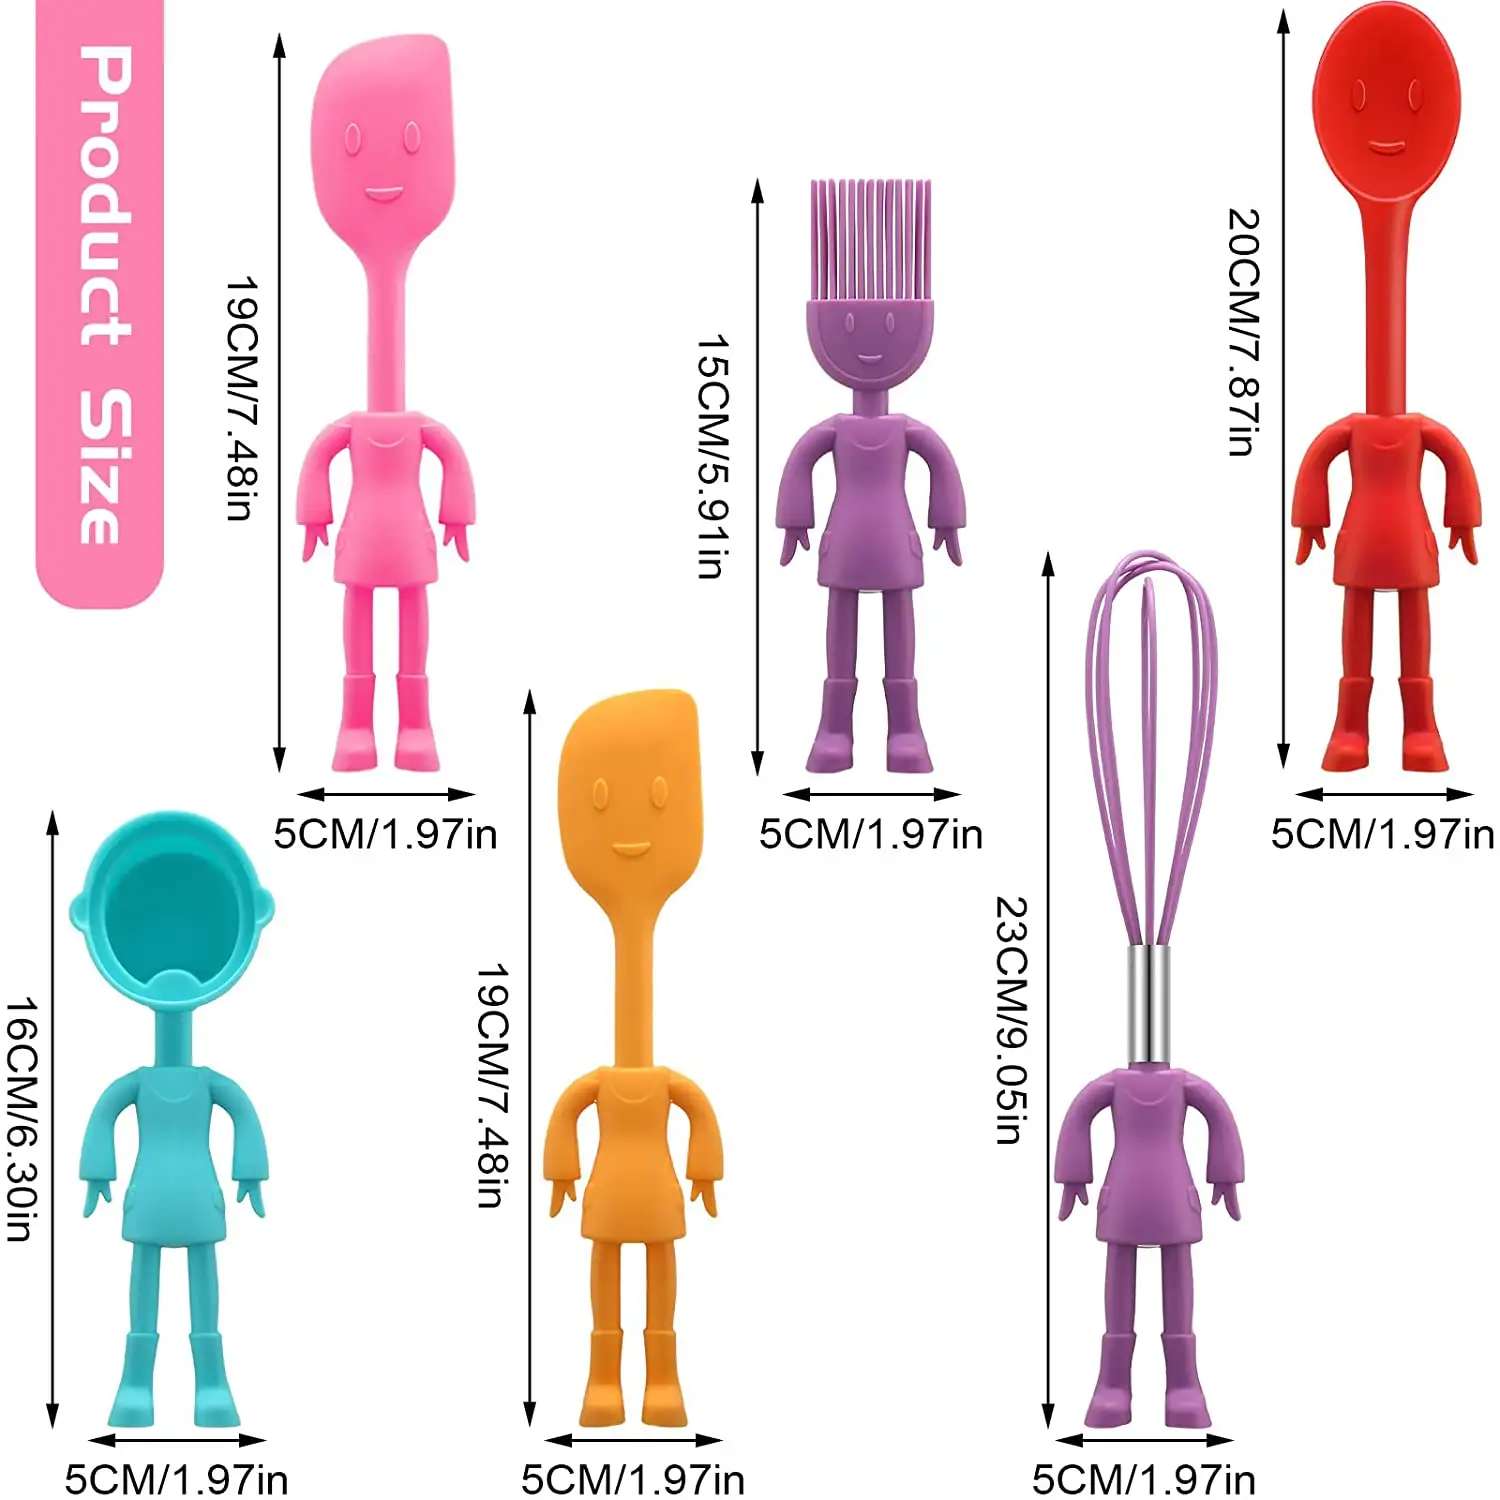 2022 human shaped kitchen utensils in 6 piece Non Stick Heat Resistant Baking Tools Gadgets Silicone Cute Kids cooking tools